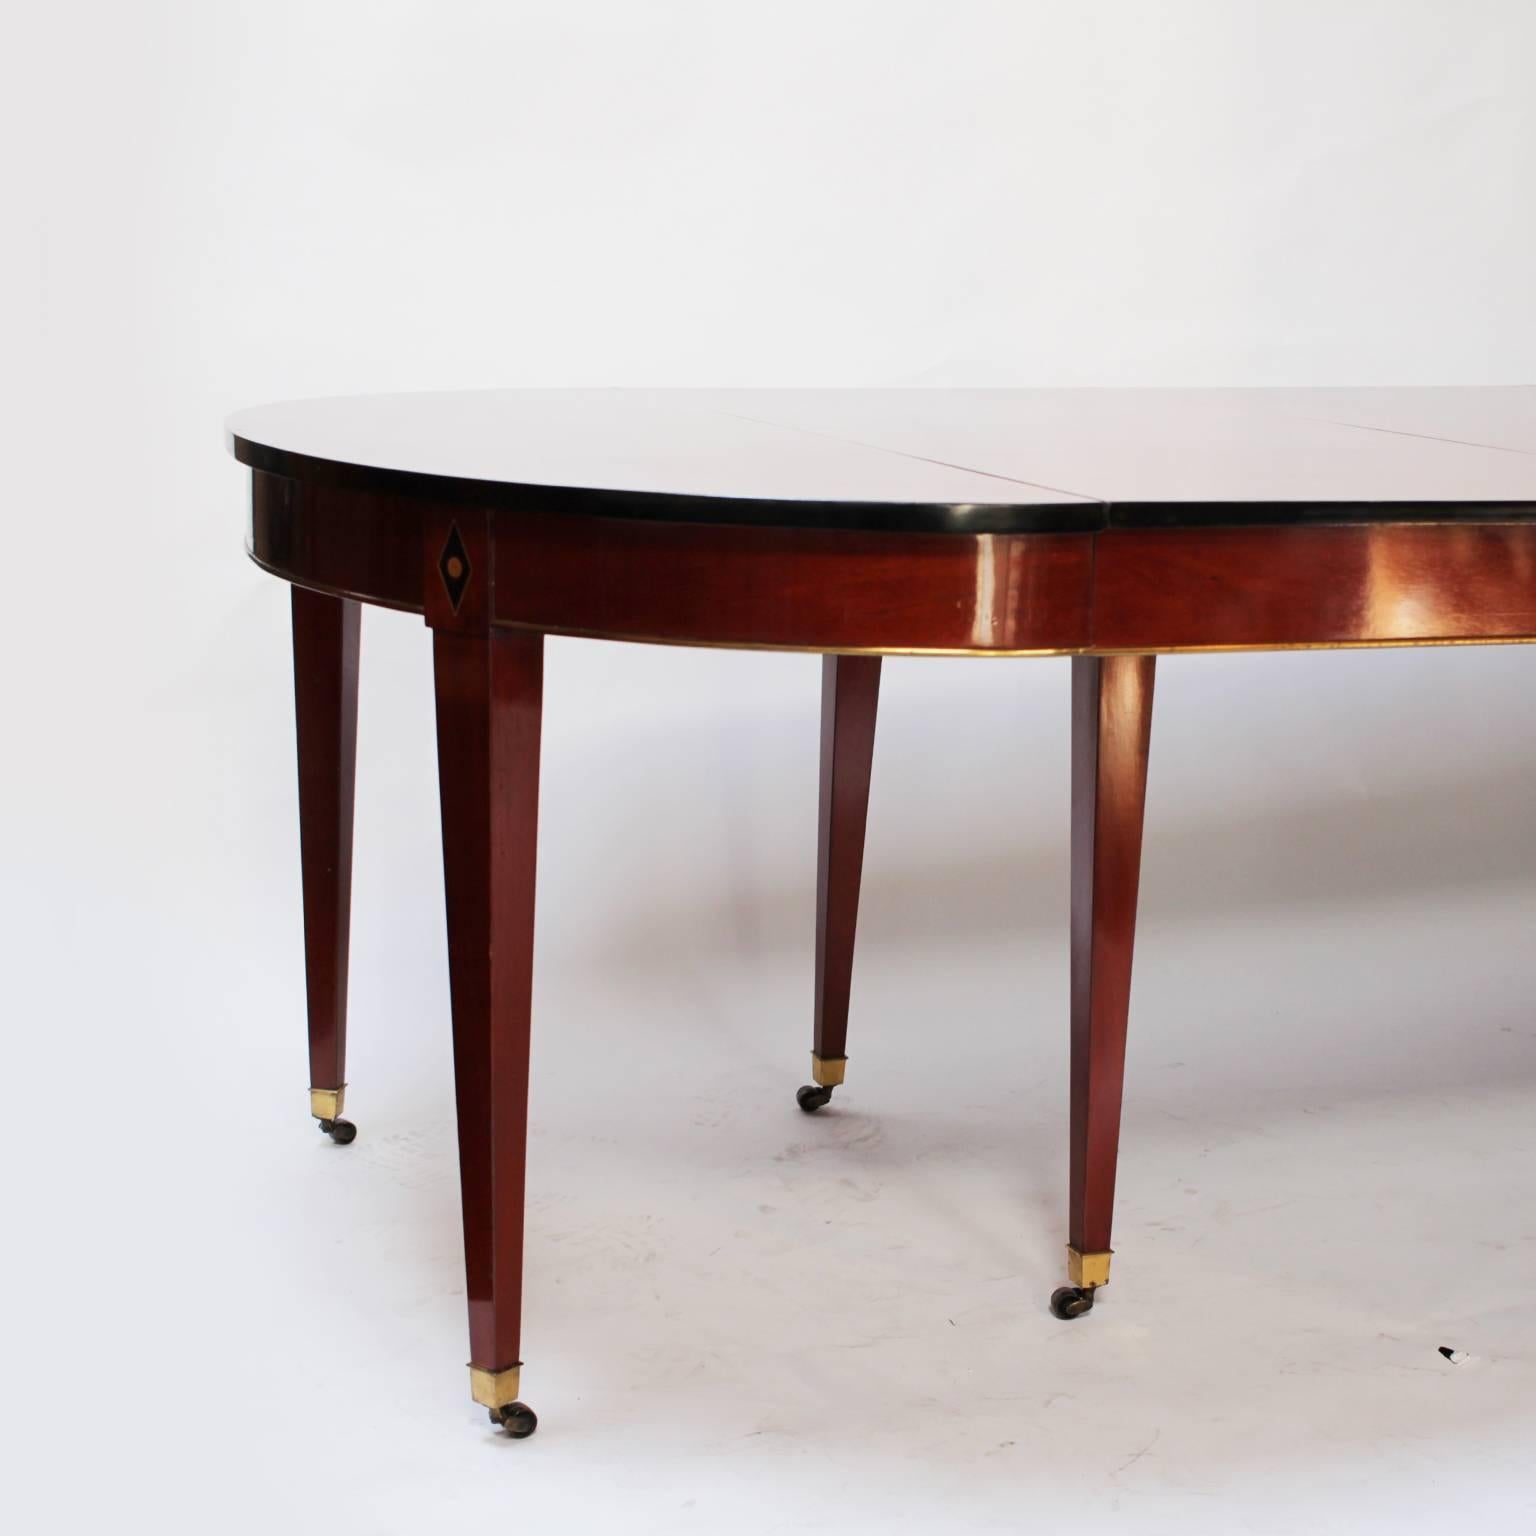 Inlay First Quater 19th Century Dining Room Table in the Style of Jean-Joseph Chapuis